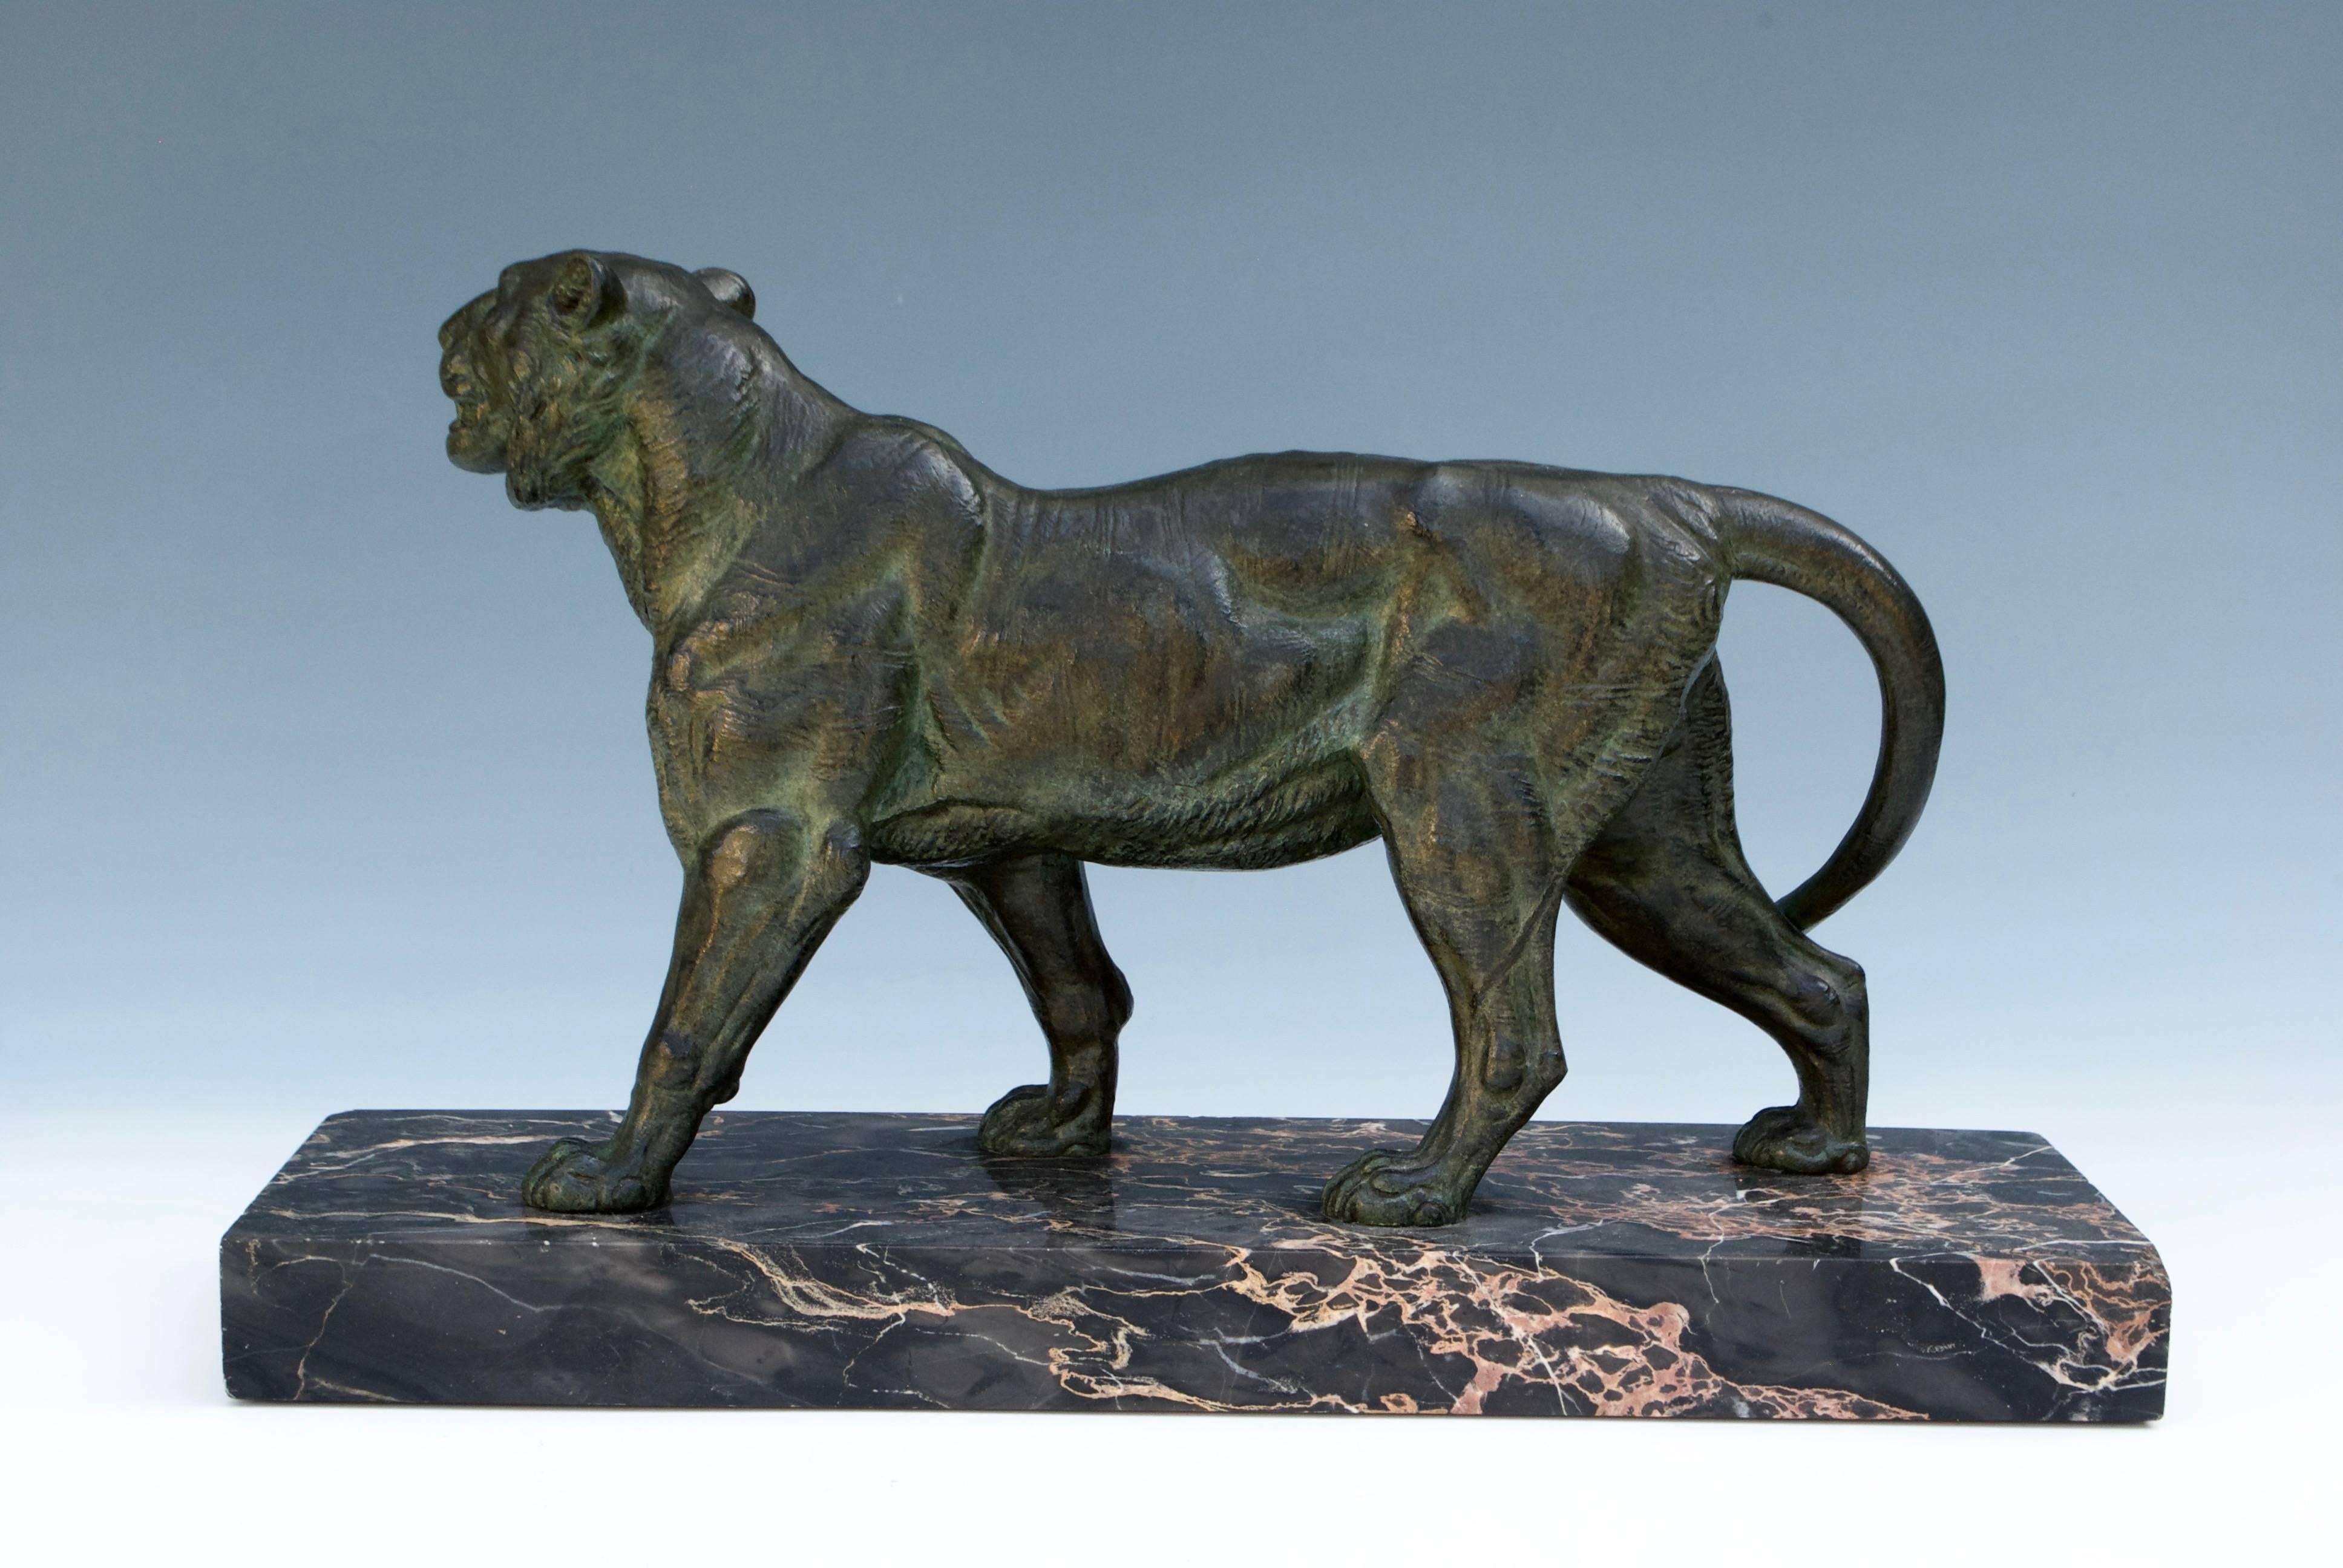 Paul-Édouard Delabrièrre (1829-1912)
An elegante bronze tiger with green patina on marble base. 
Signed on the right side of the base.